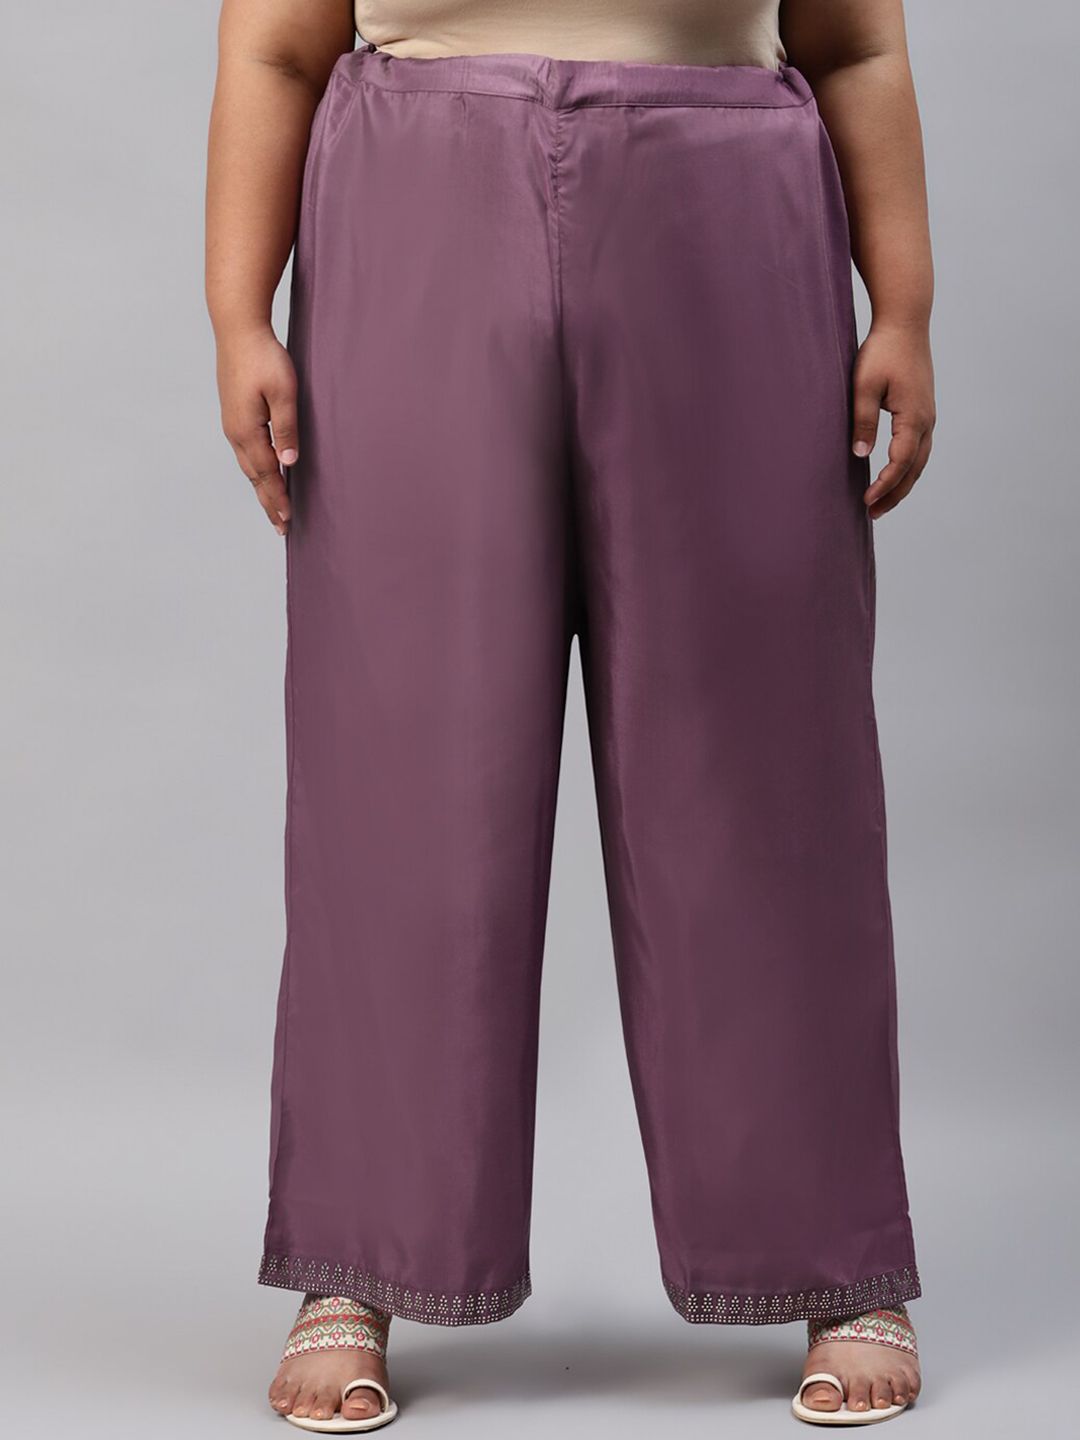 W Women Plus Size Pink aw-22 Trousers Price in India